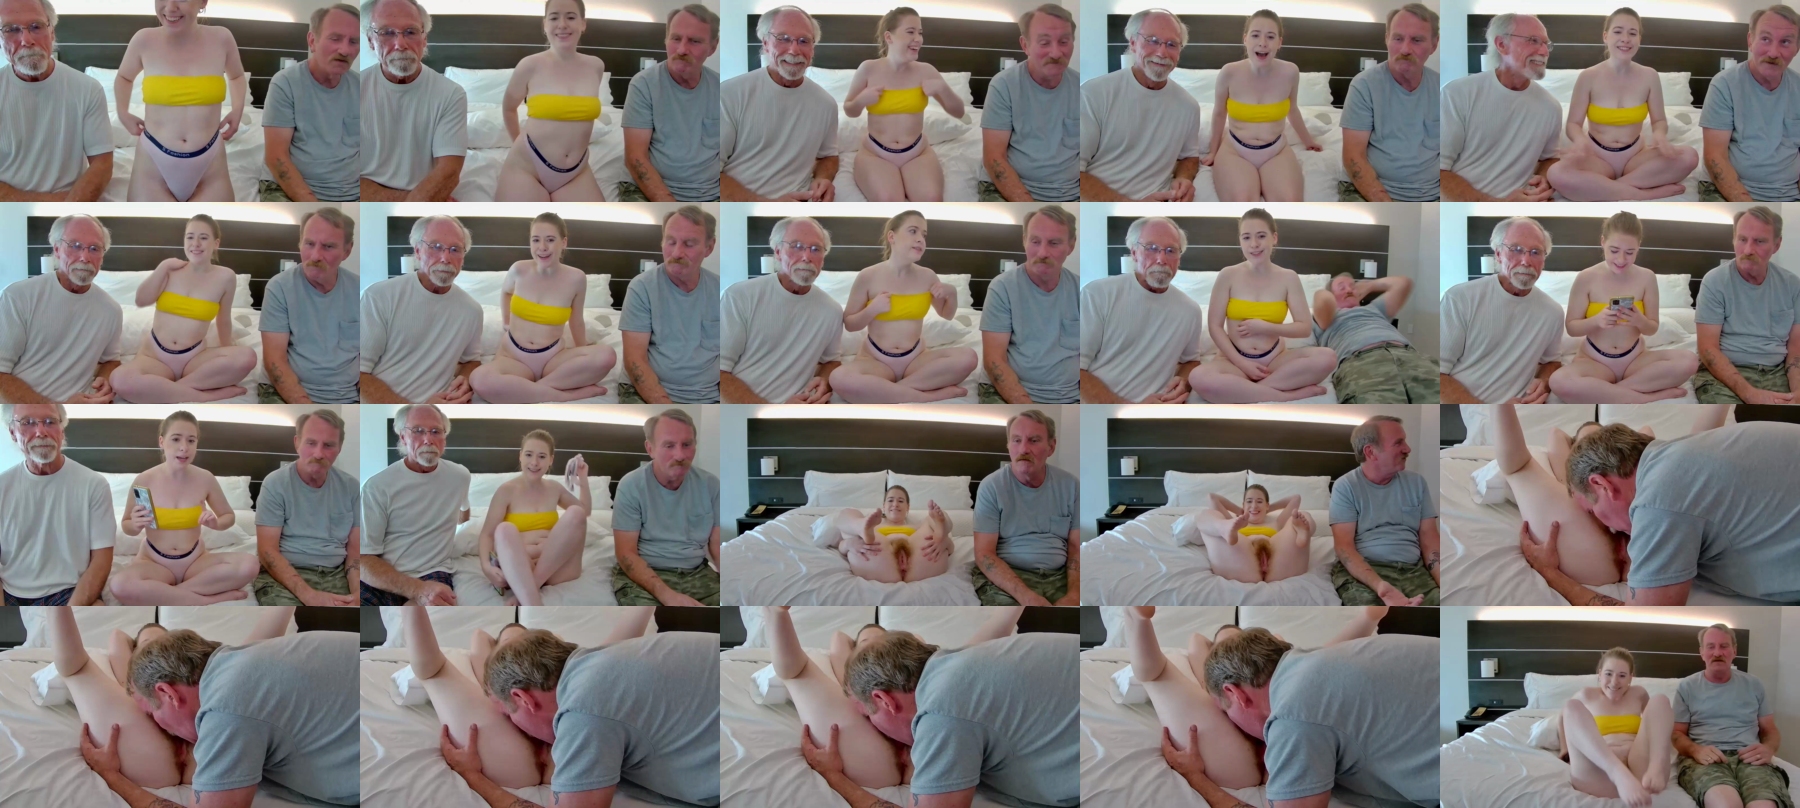 Alice and daddy chaturbate